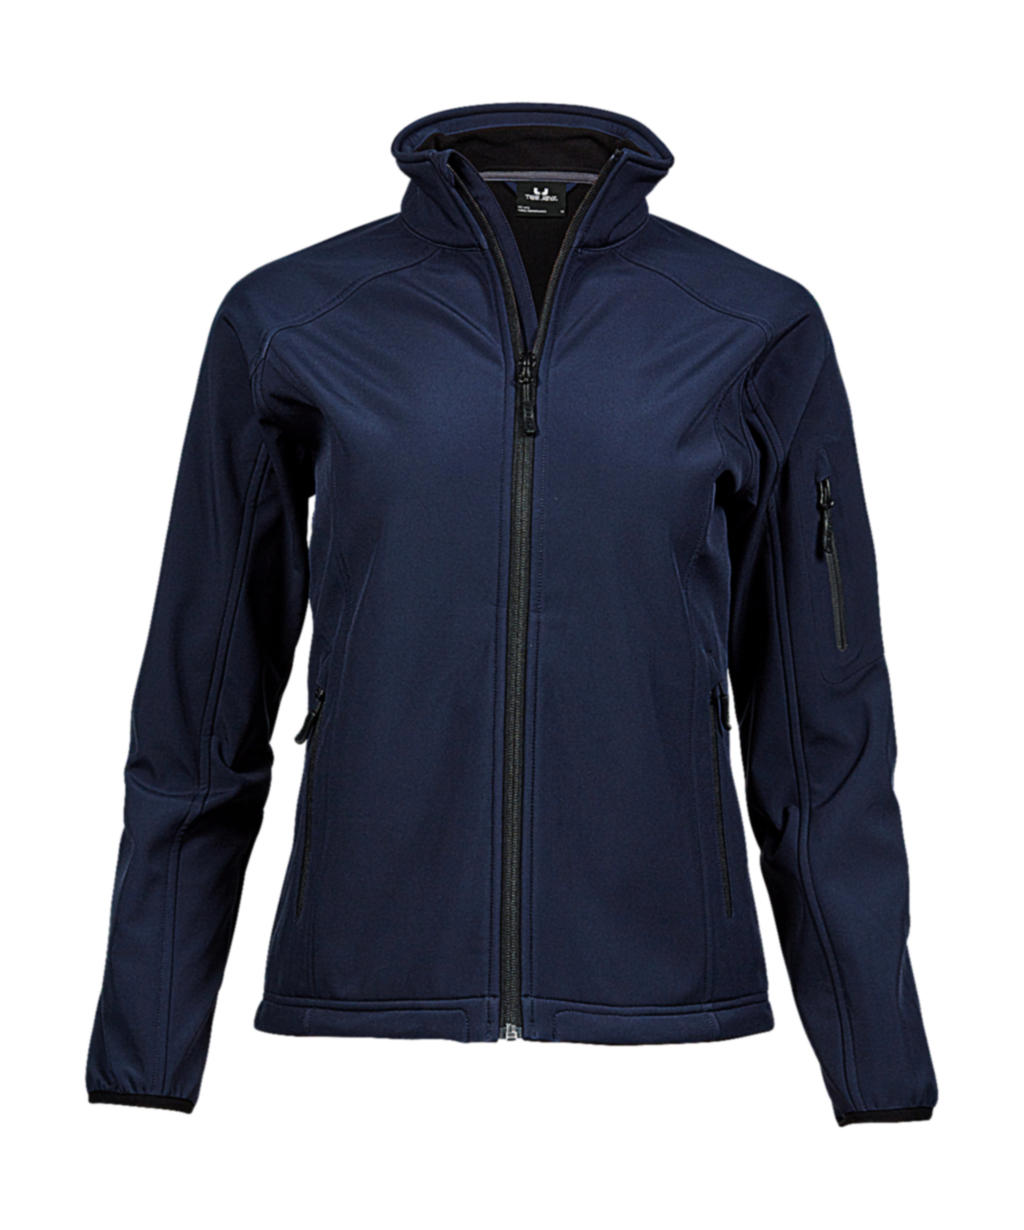  Ladies Lightweight Performance Softshell in Farbe Navy